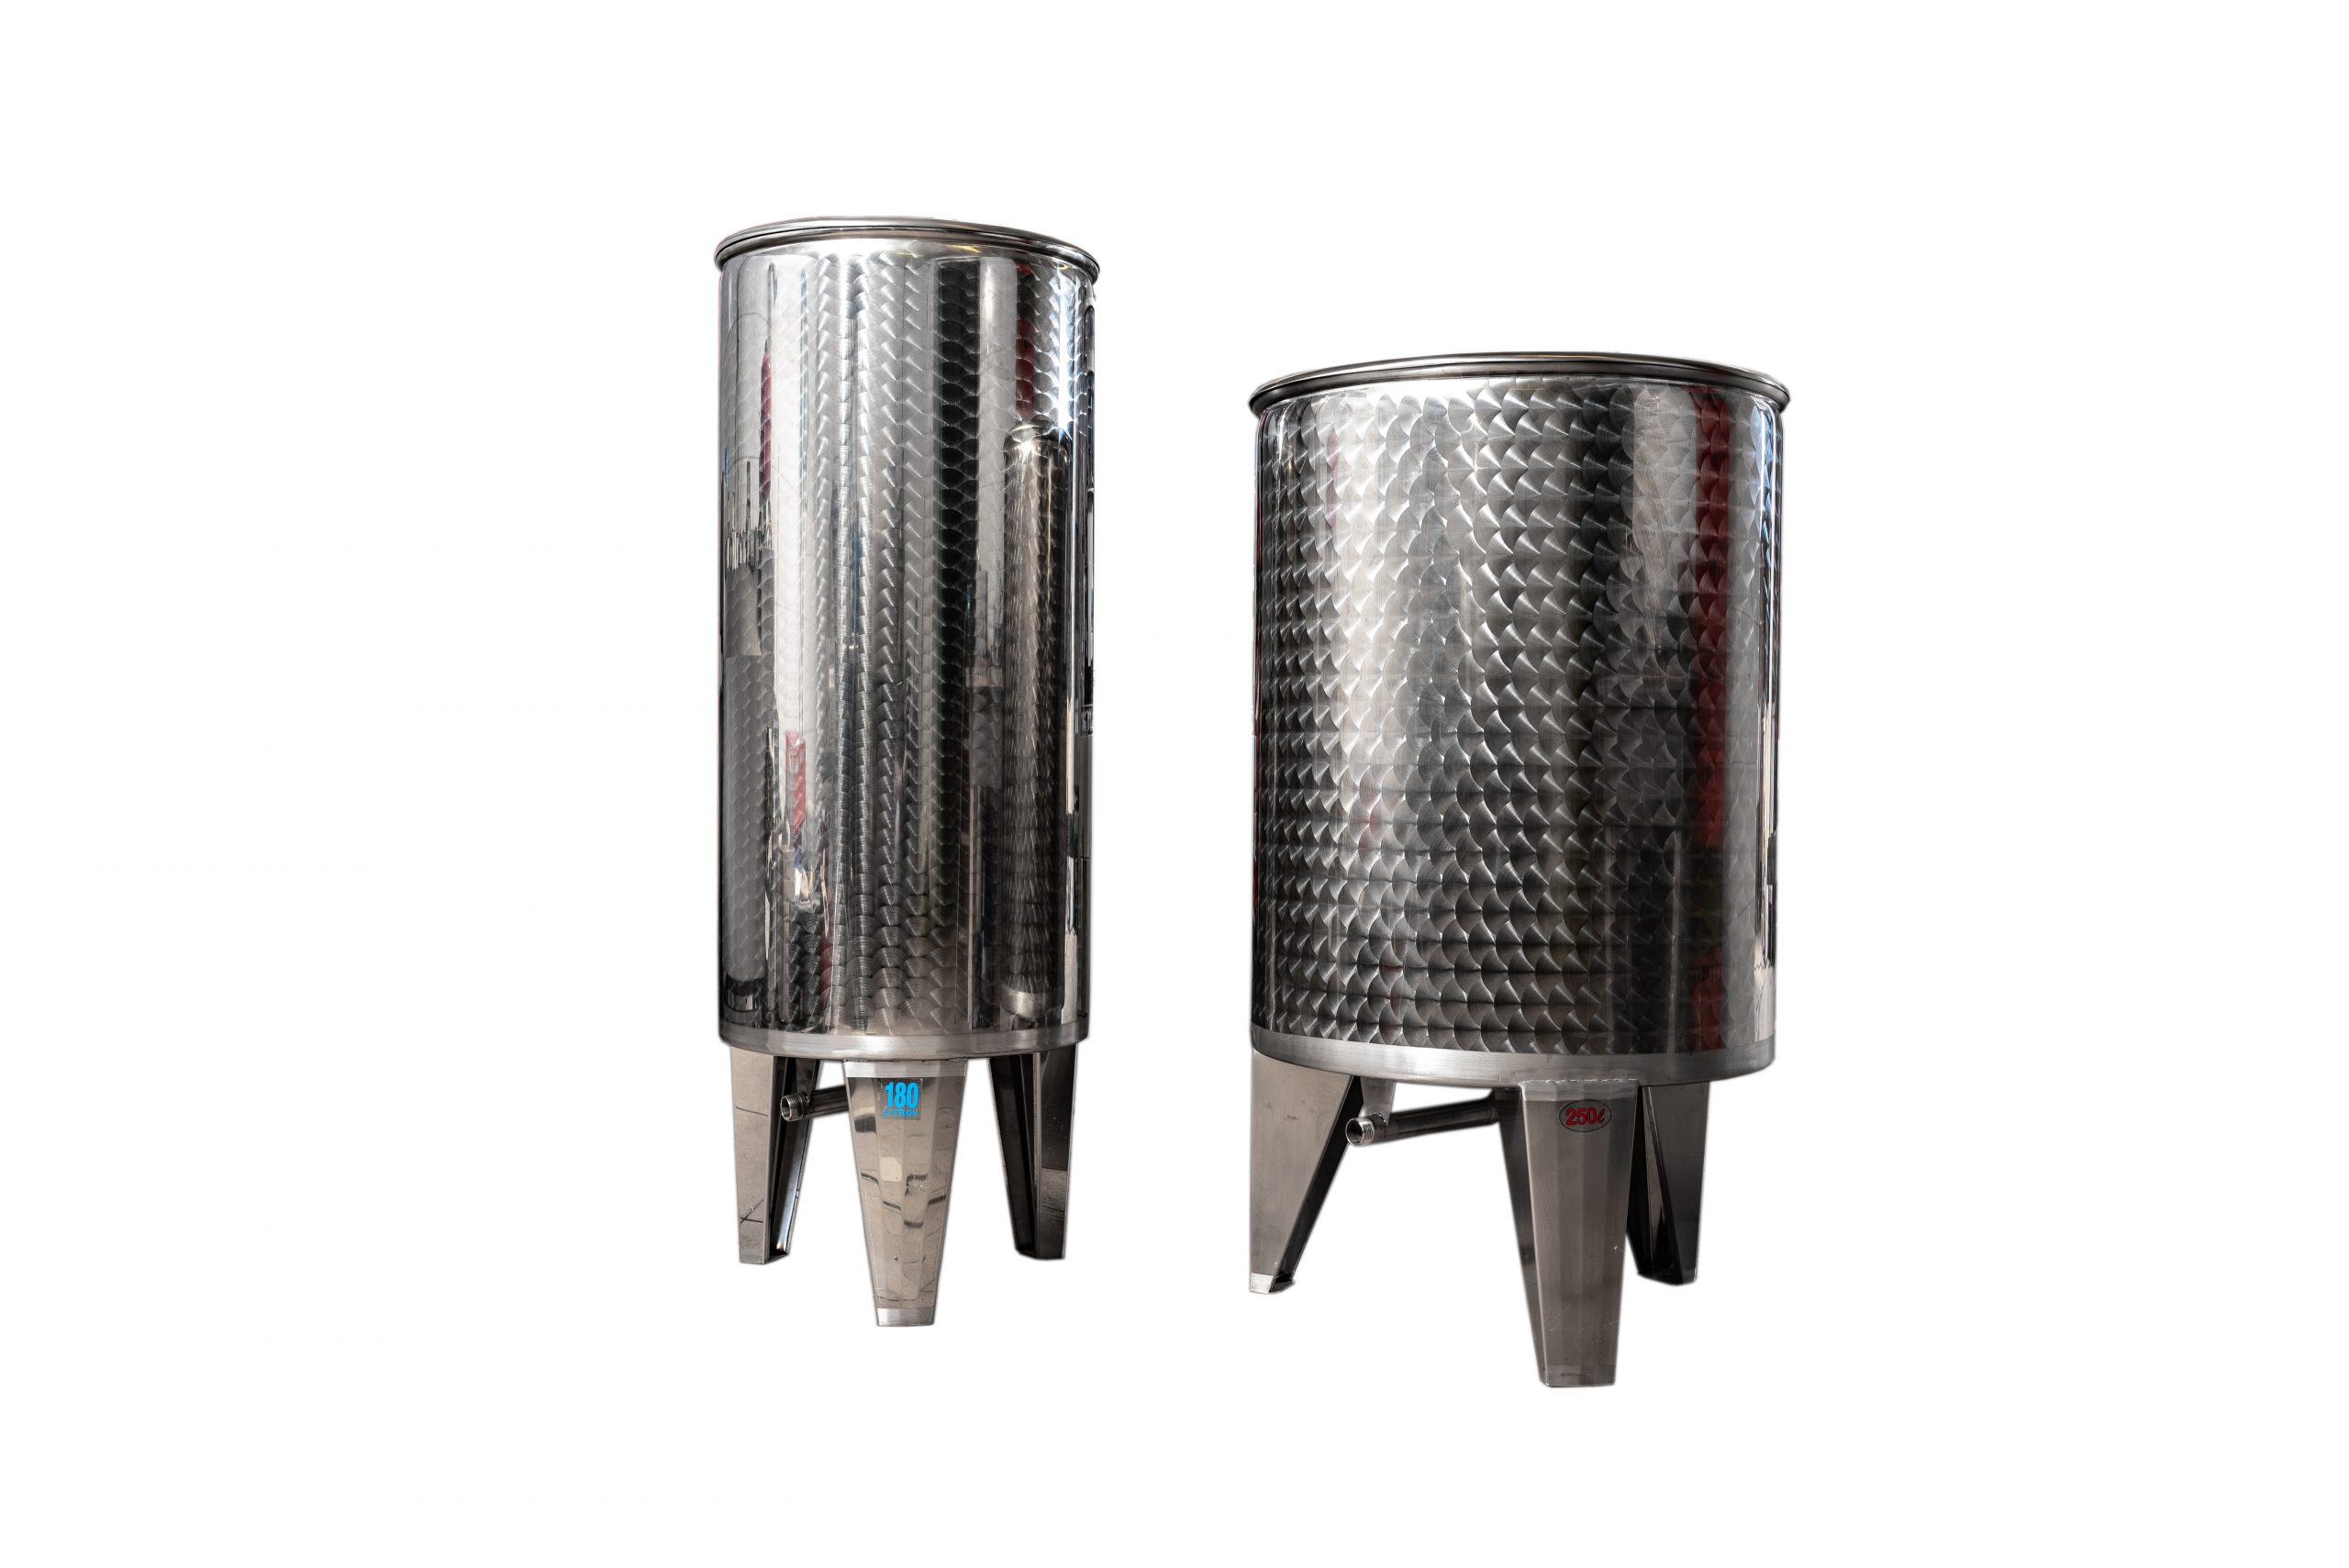 Stainless steel tanks with different sizes